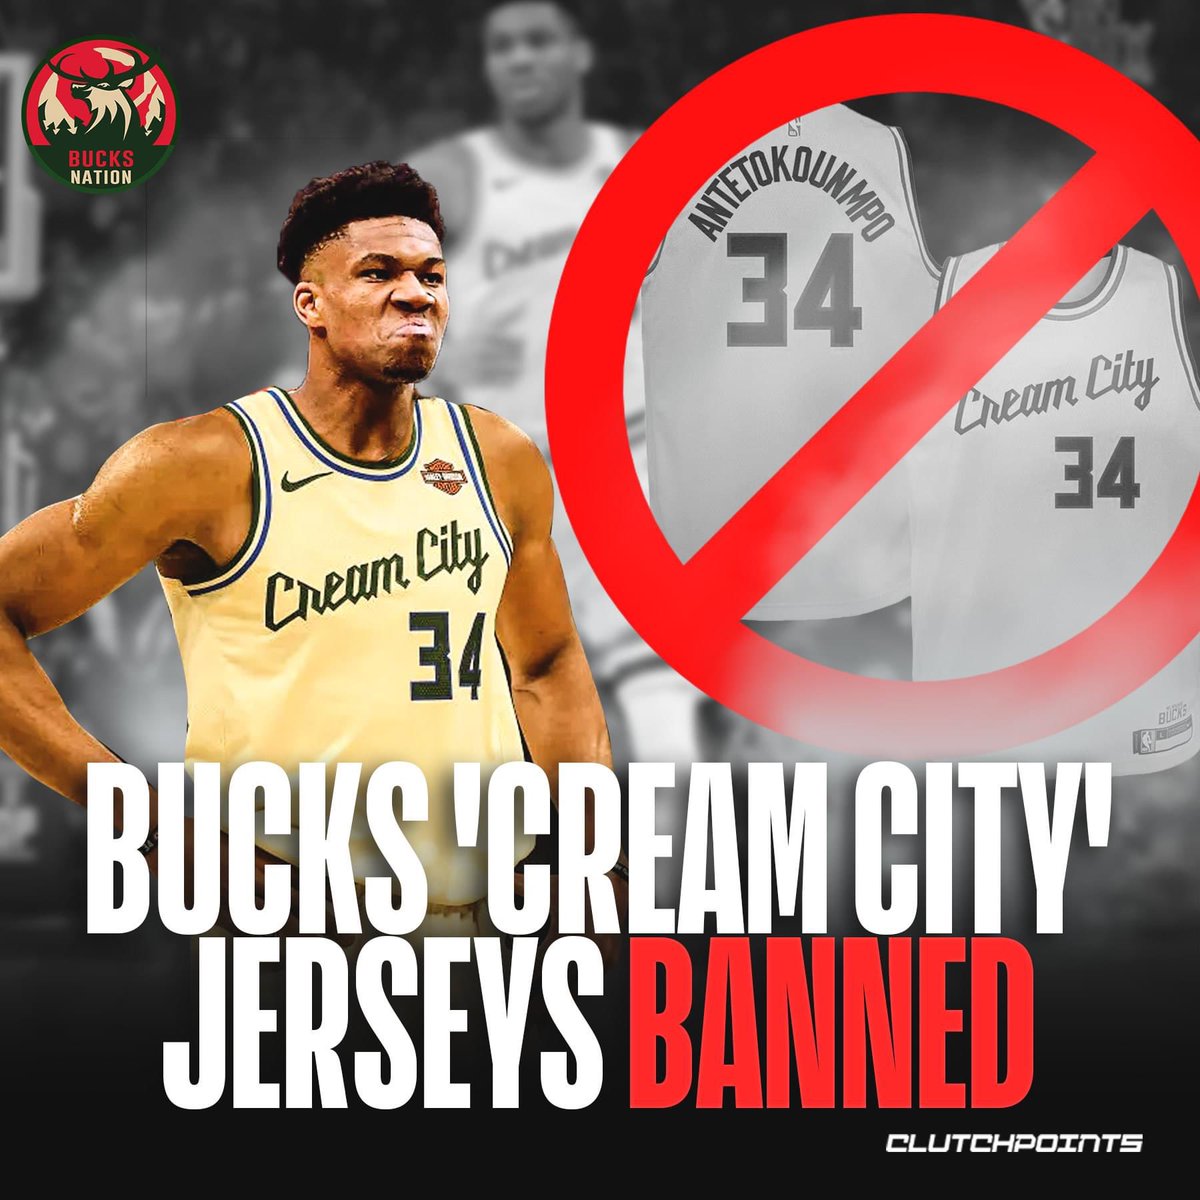 The NBA has banned all cream colored jerseys